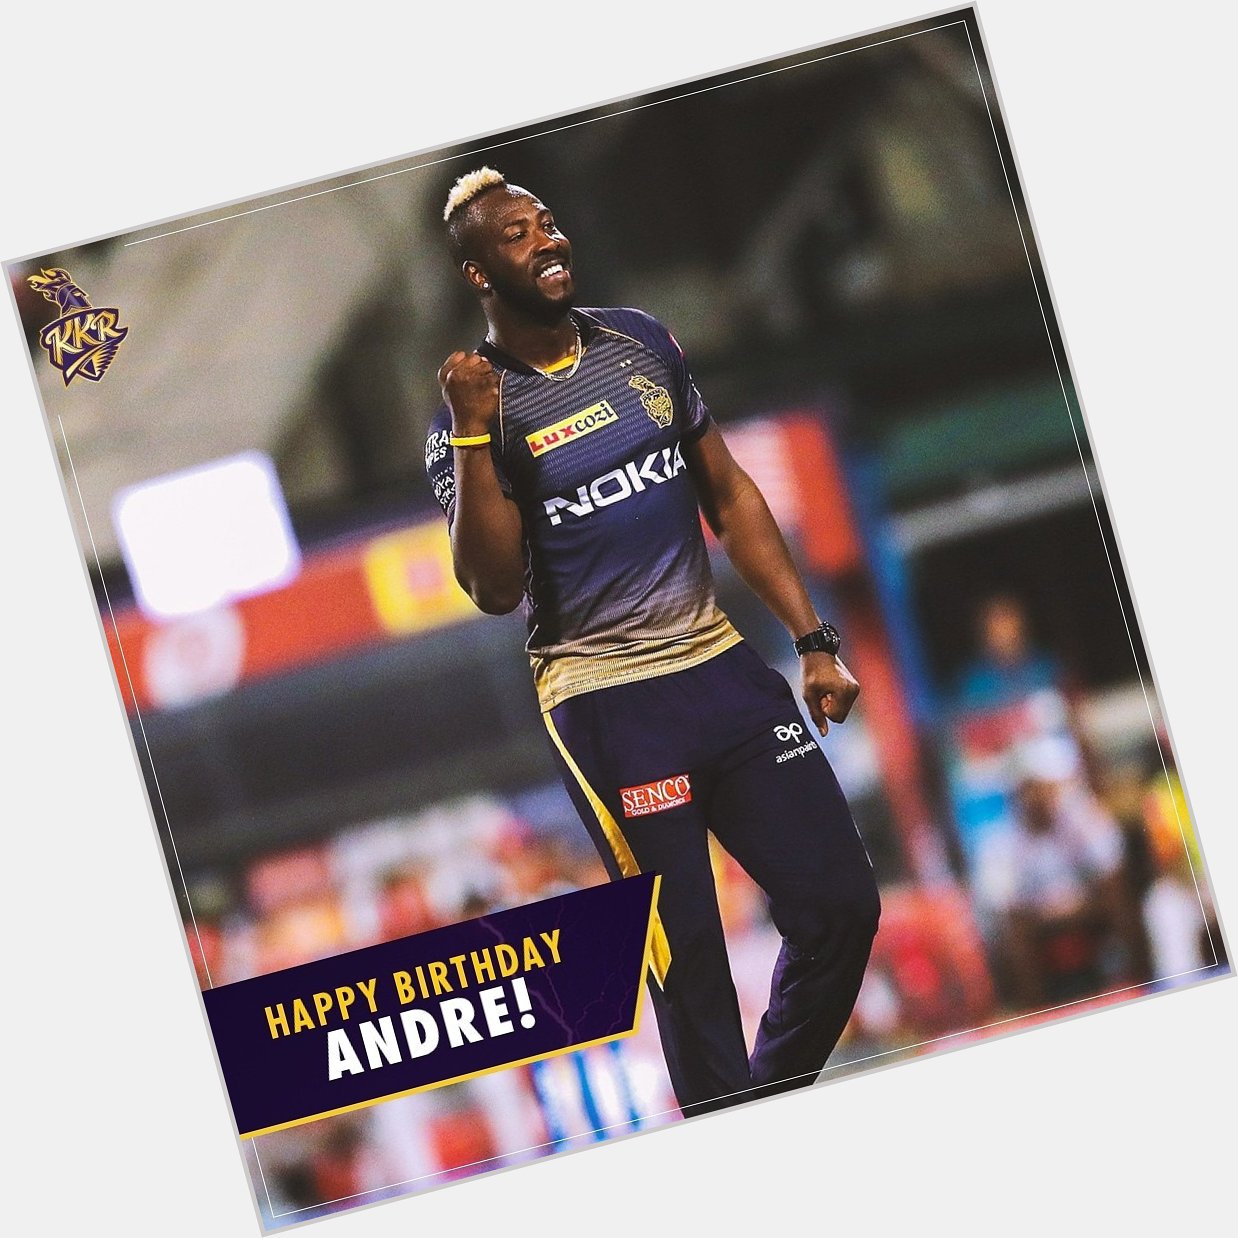 Happy birthday respected Mr. Andre Russell. 